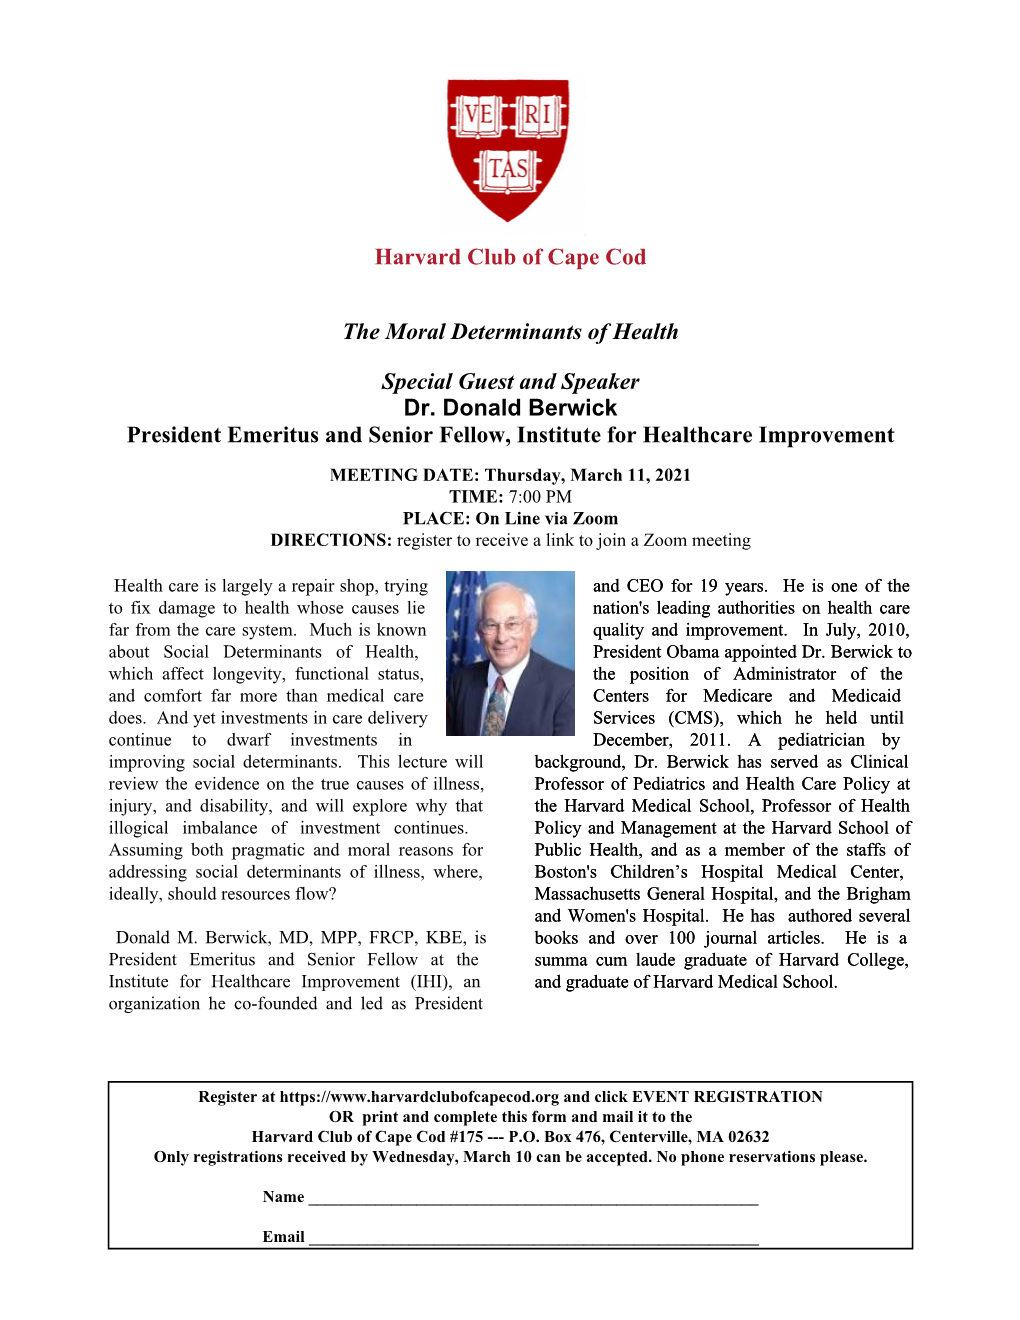 Harvard Club of Cape Cod the Moral Determinants of Health Special